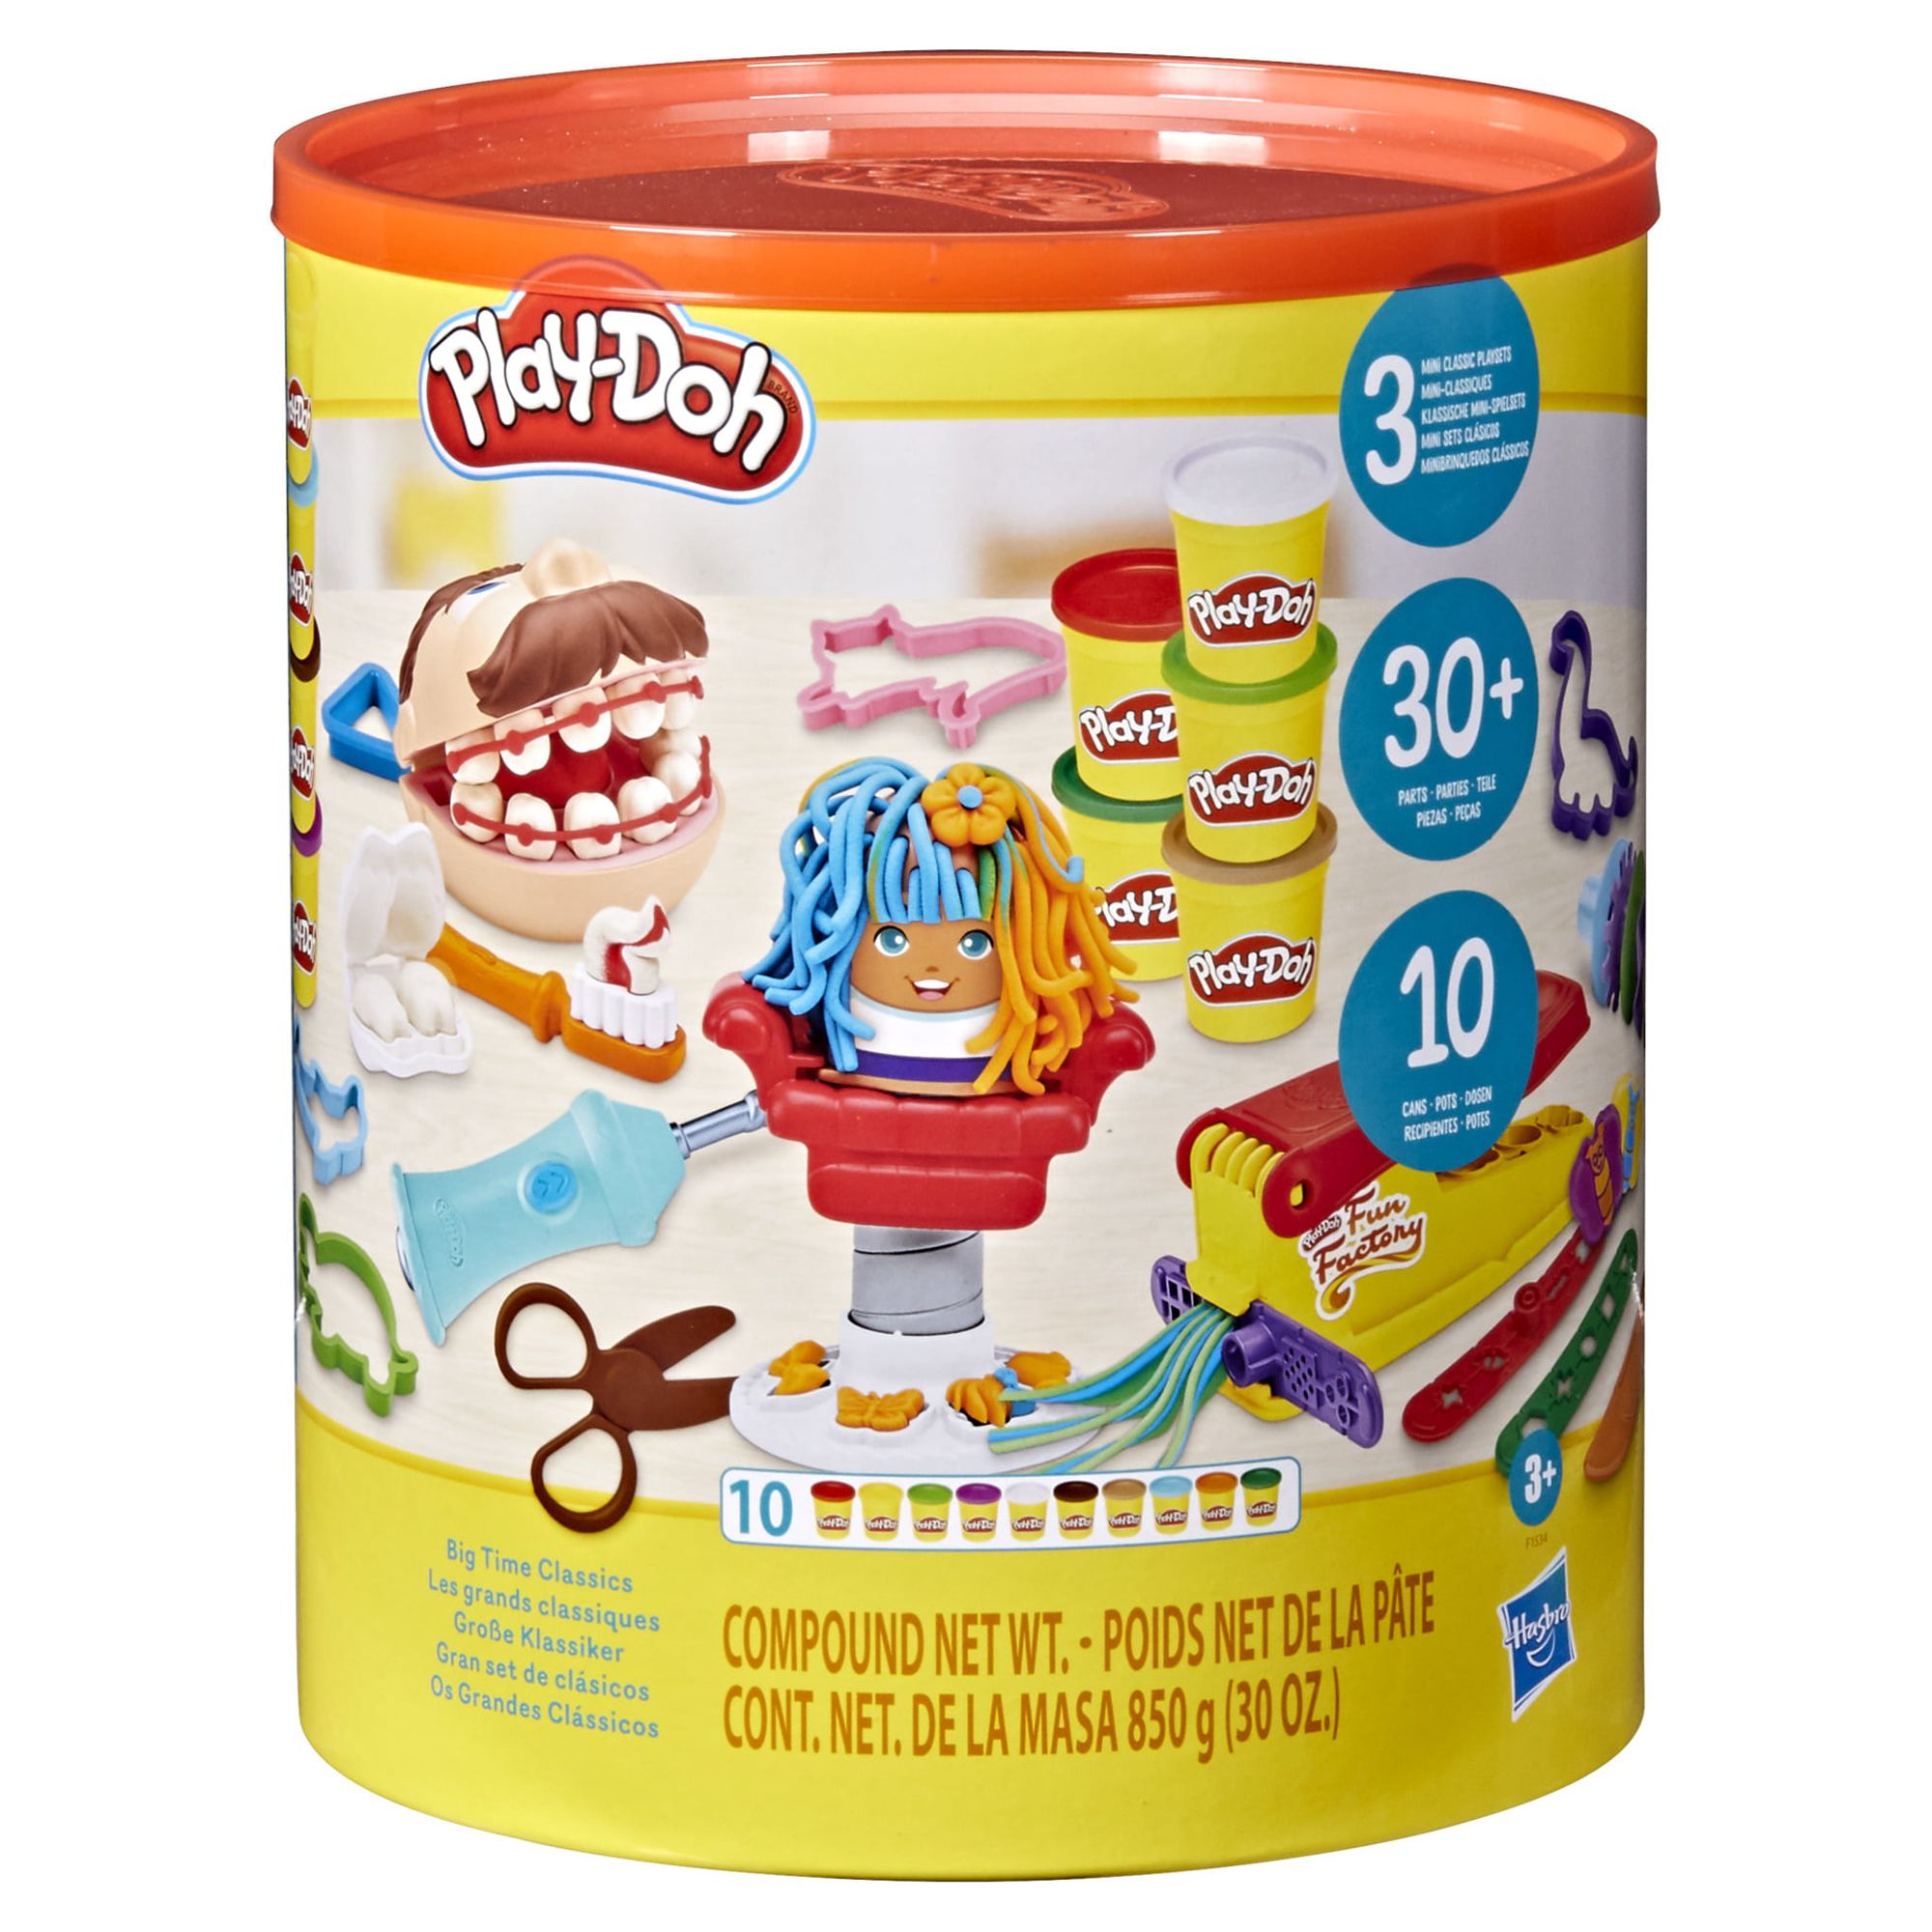 Play-Doh Big Time Classics Canister Bundle of 3 Playsets, 30 Ounces Modeling Compound - image 2 of 11